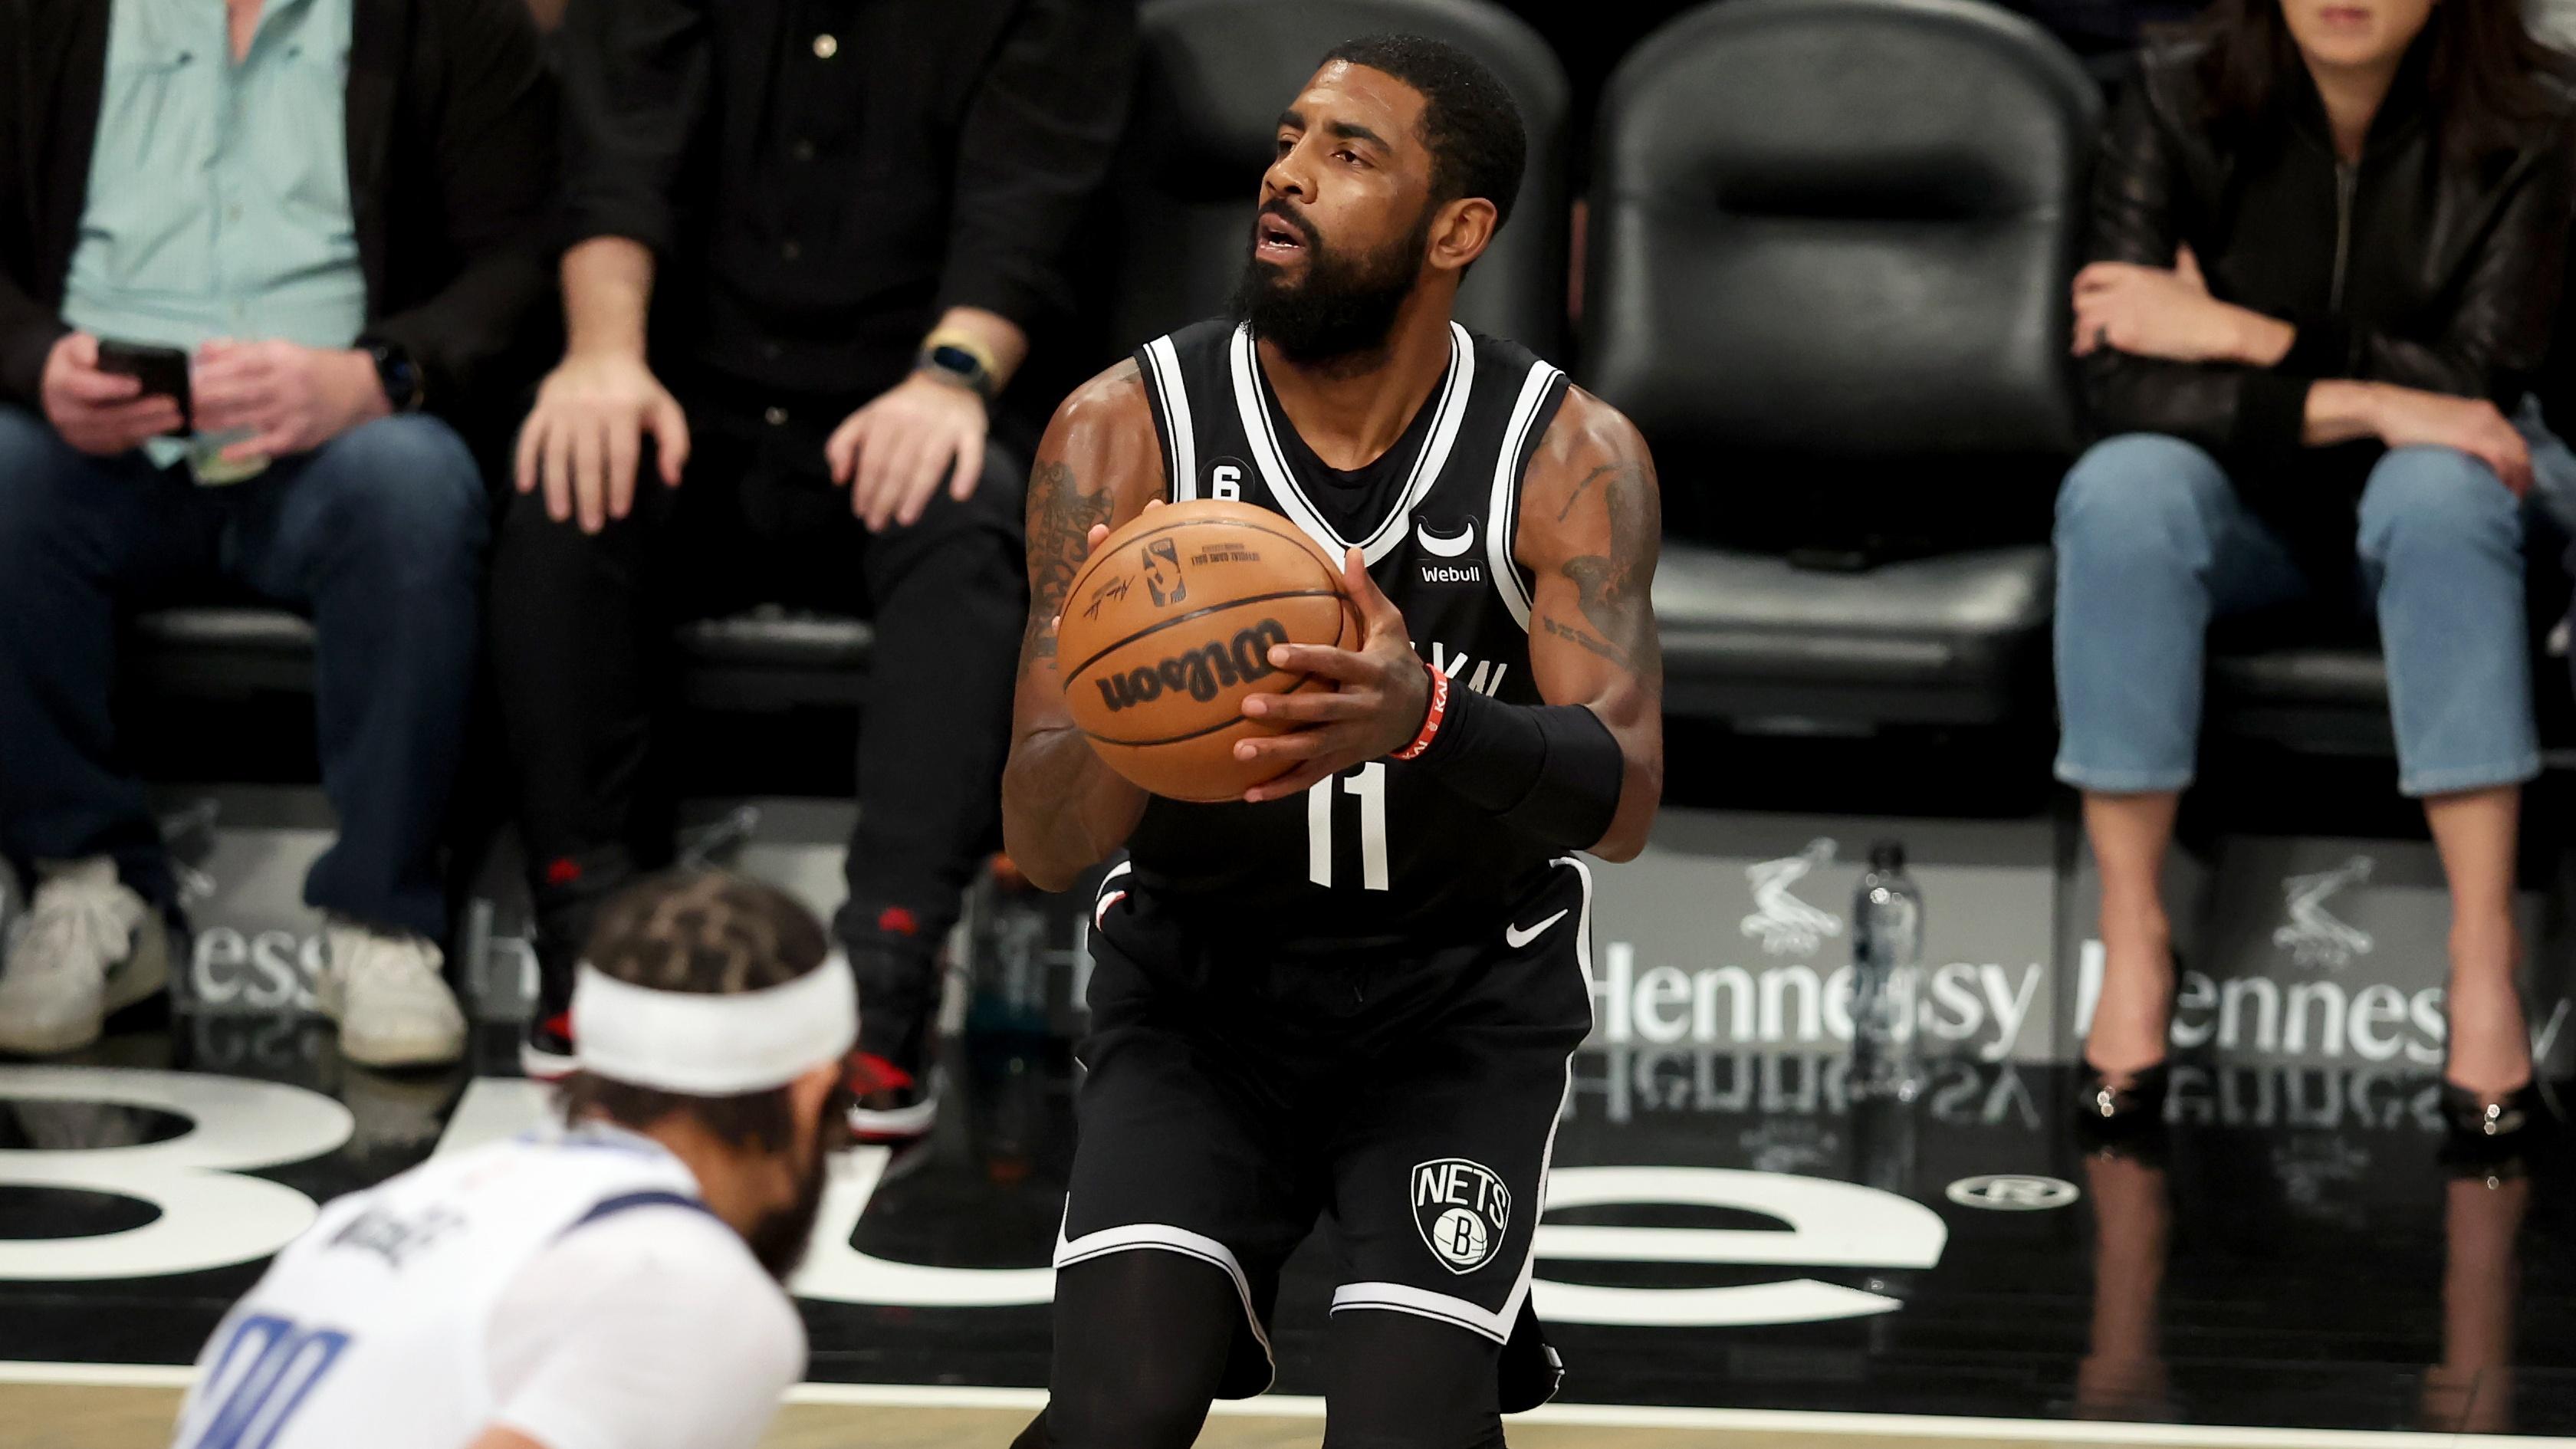 Brooklyn Nets guard Kyrie Irving (11) shoots a three point shot against Dallas Mavericks center JaVale McGee (00) during the first quarter at Barclays Center. / Brad Penner - USA TODAY Sports